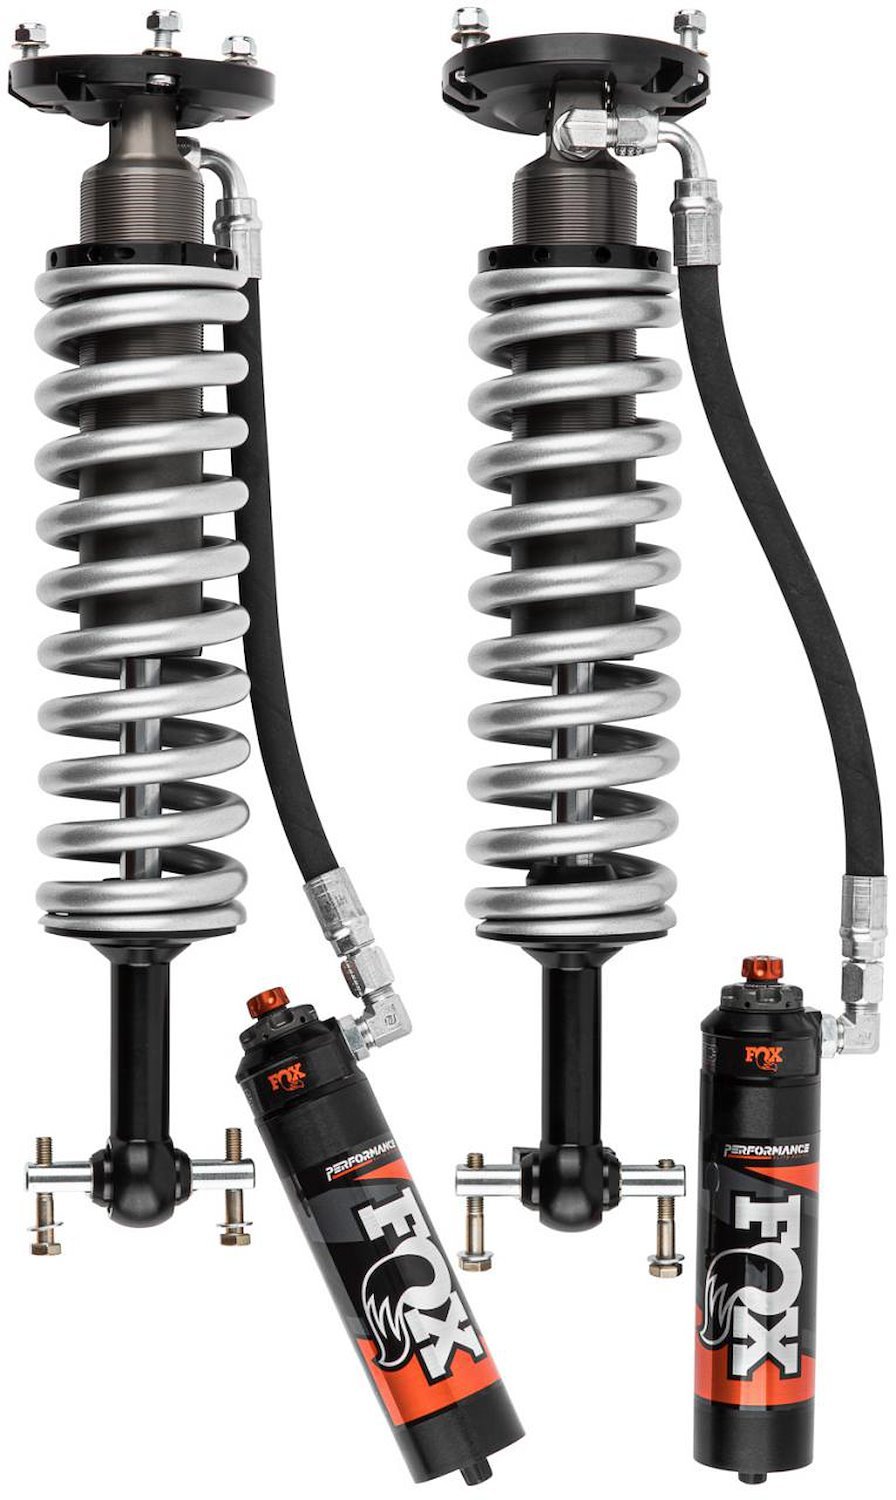 Front Performance Elite-Series Coil-Over Shock Set fits Select Late-Model Chevy Silverado 1500, GMC Sierra 1500 [0-3.5 in. Lift]